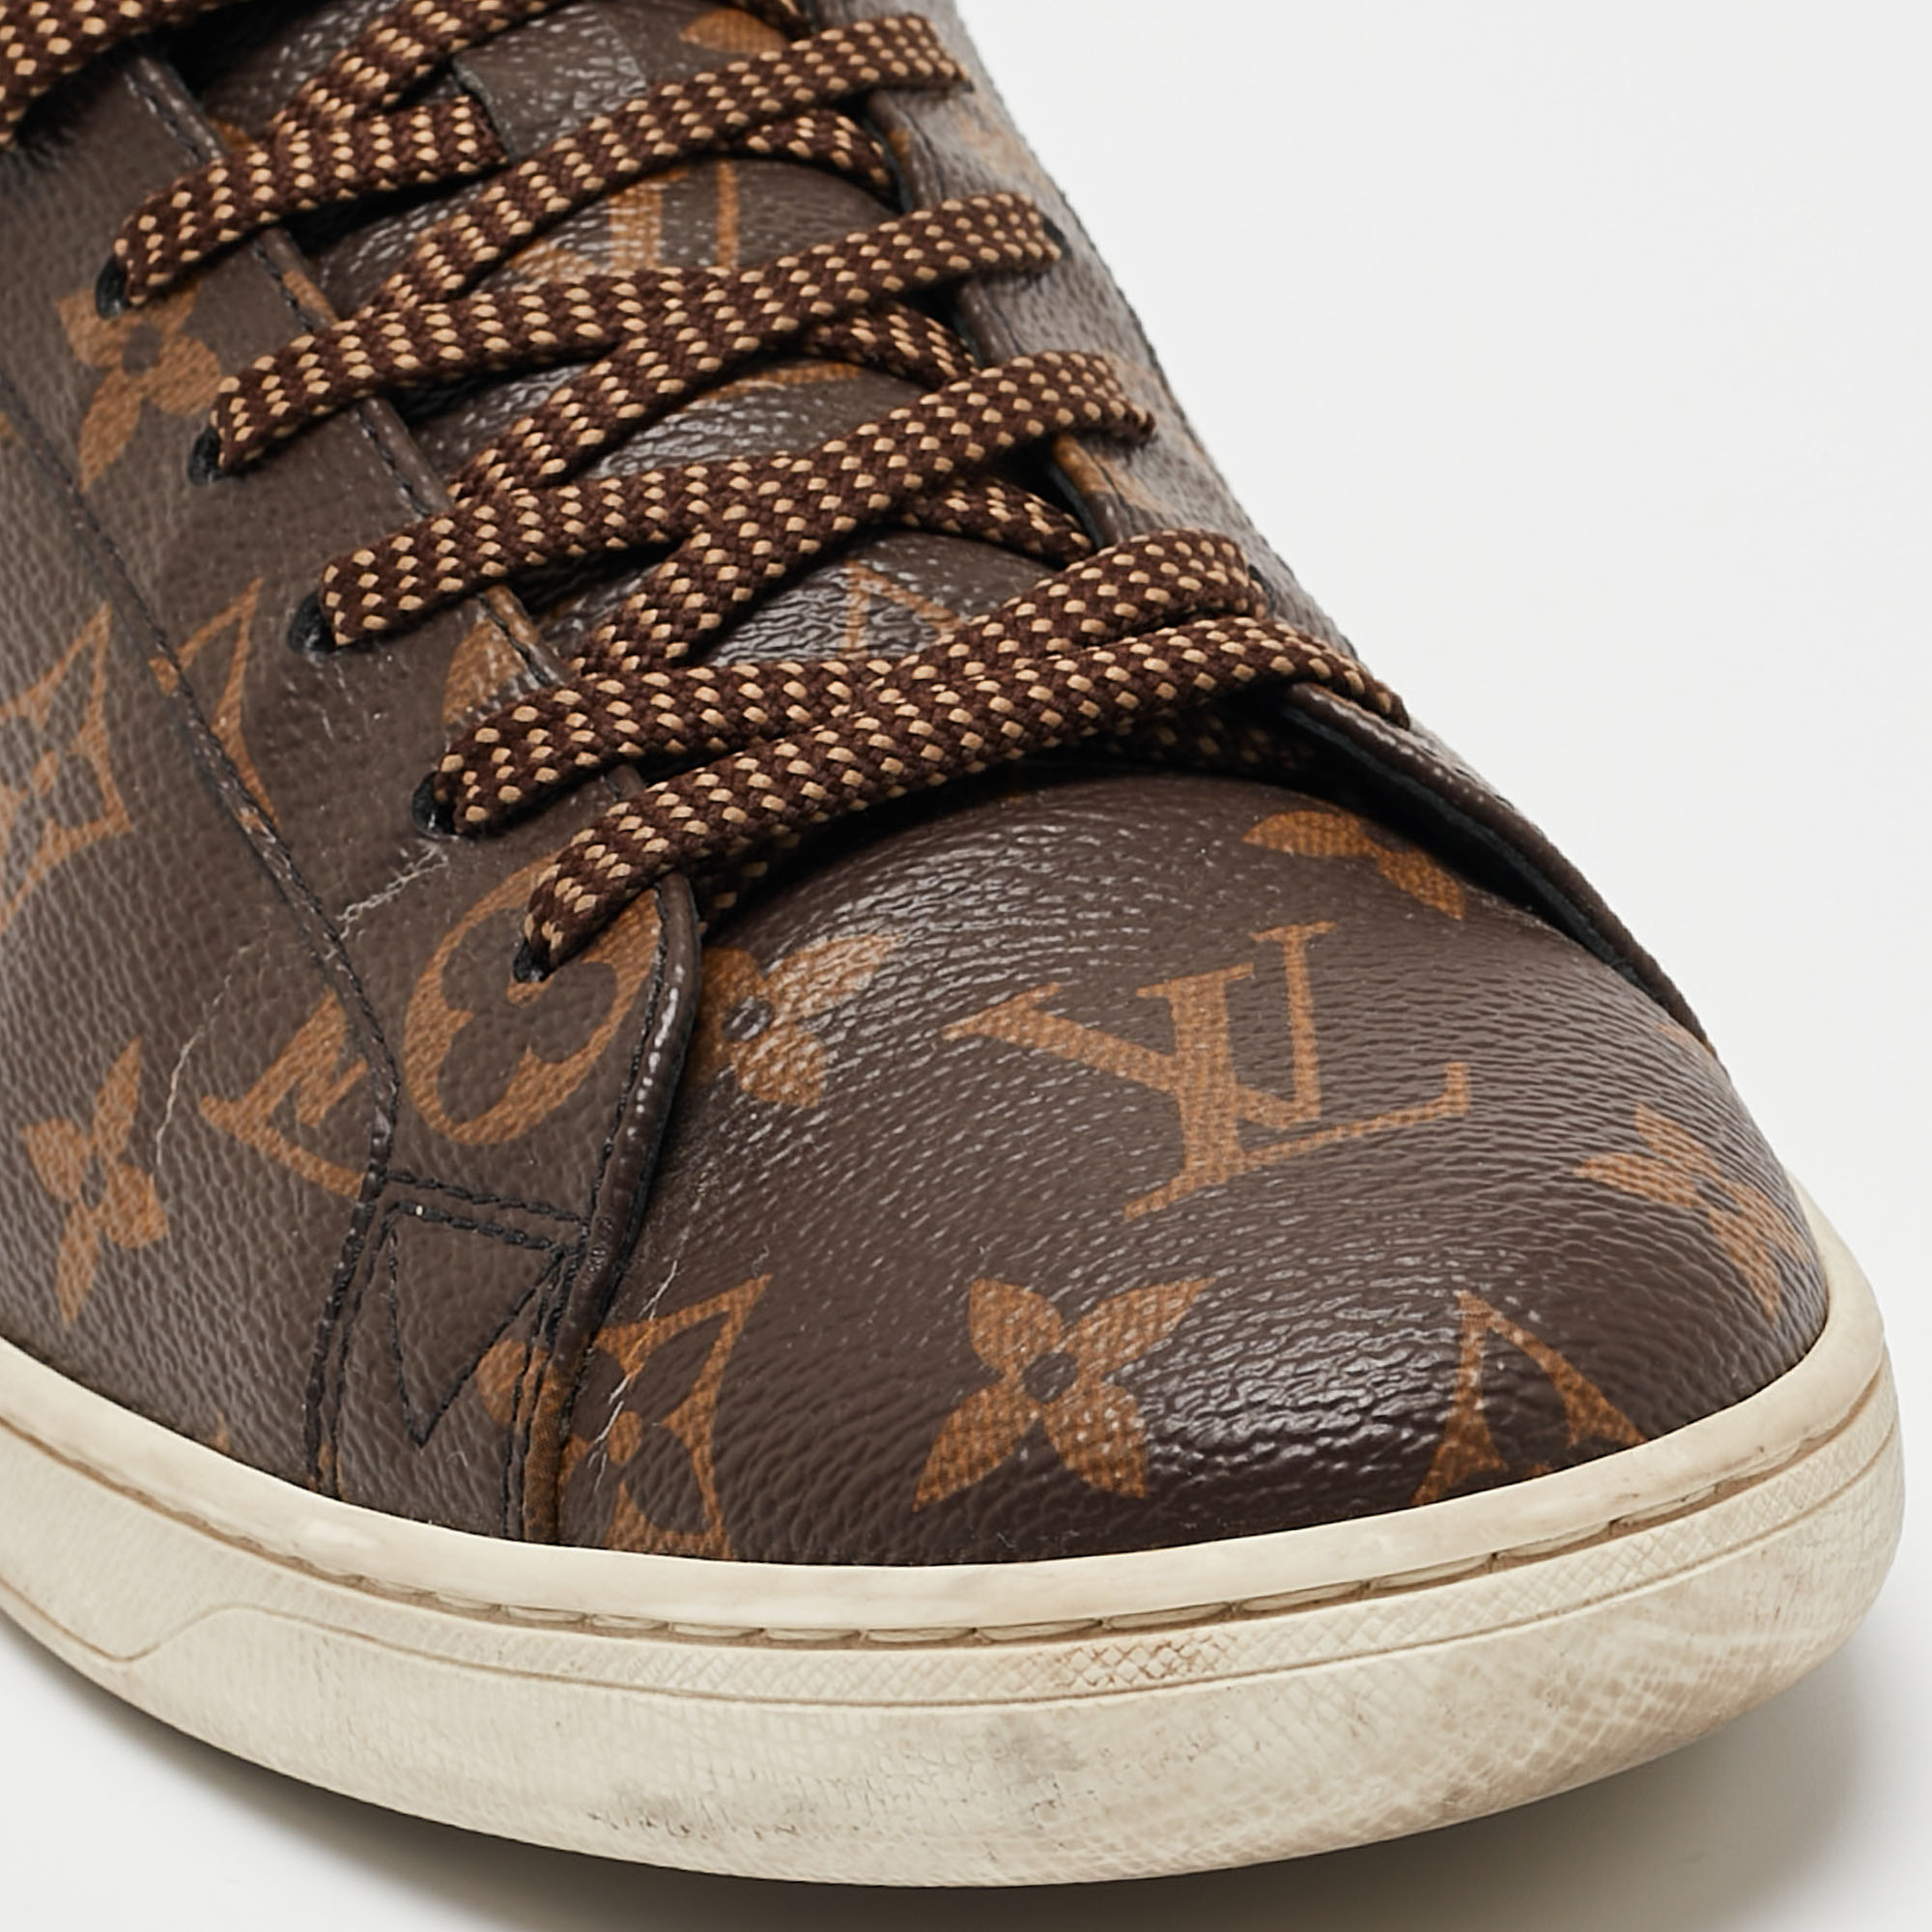 Louis Vuitton Brown Monogram Canvas And Leather Frontrow Low Top Sneakers Size 42